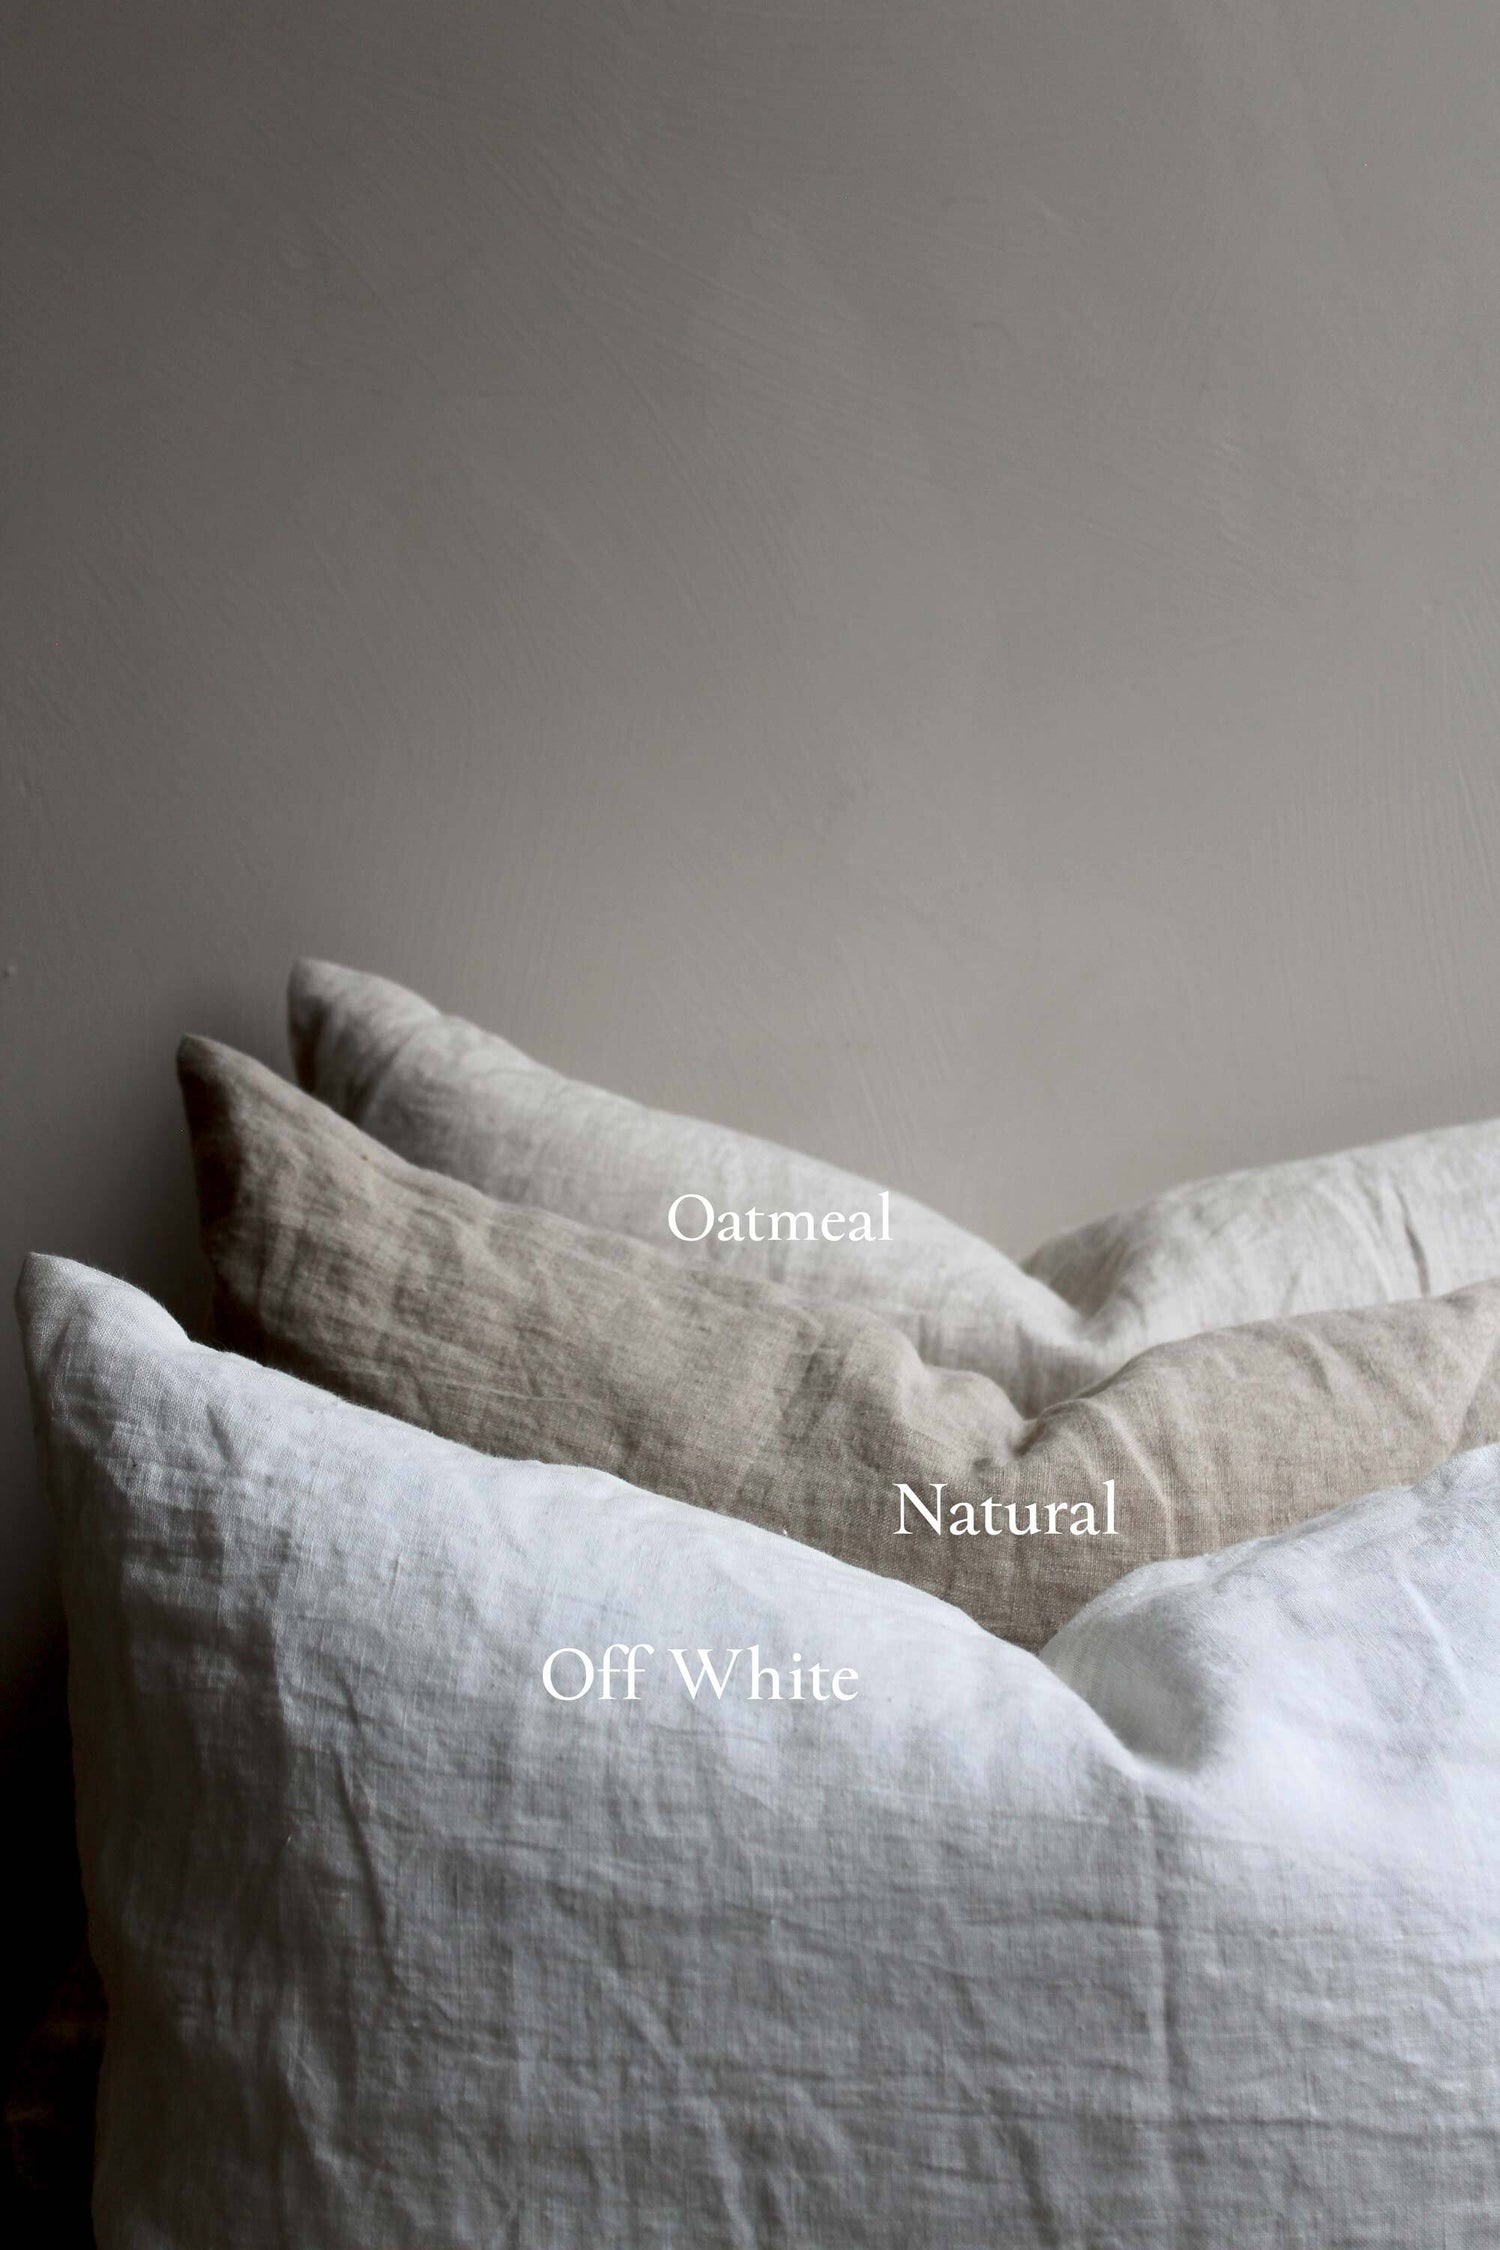 Trio of the Linen Cushions by Timeless Linen, in Oatmeal, Natural and Off White.